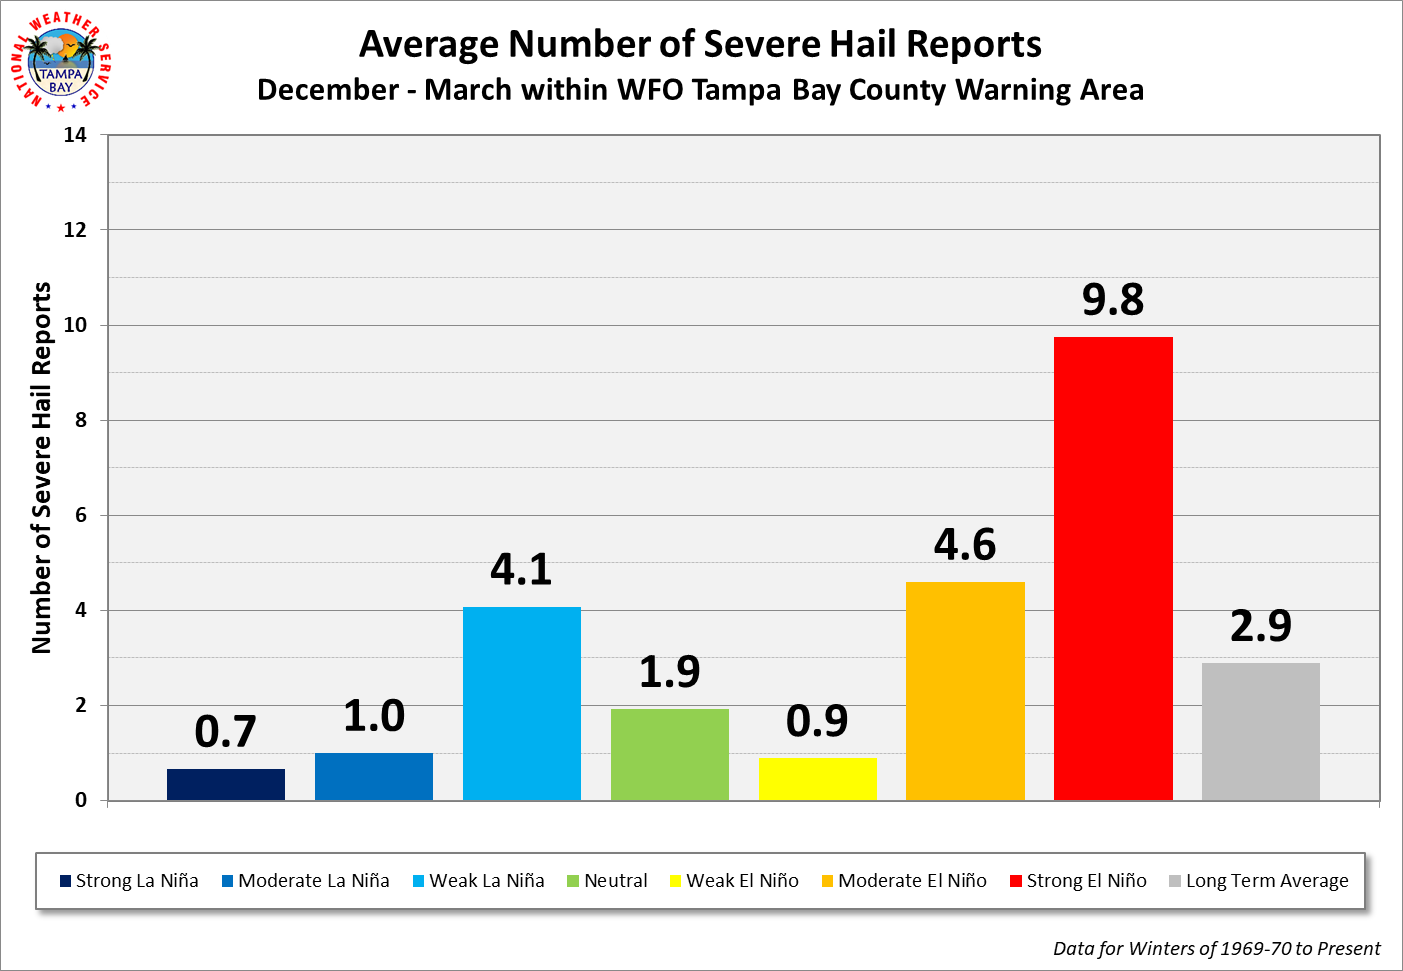 WFO Tampa Bay Average Number of Severe Hail Events per Cool Season by ENSO Category